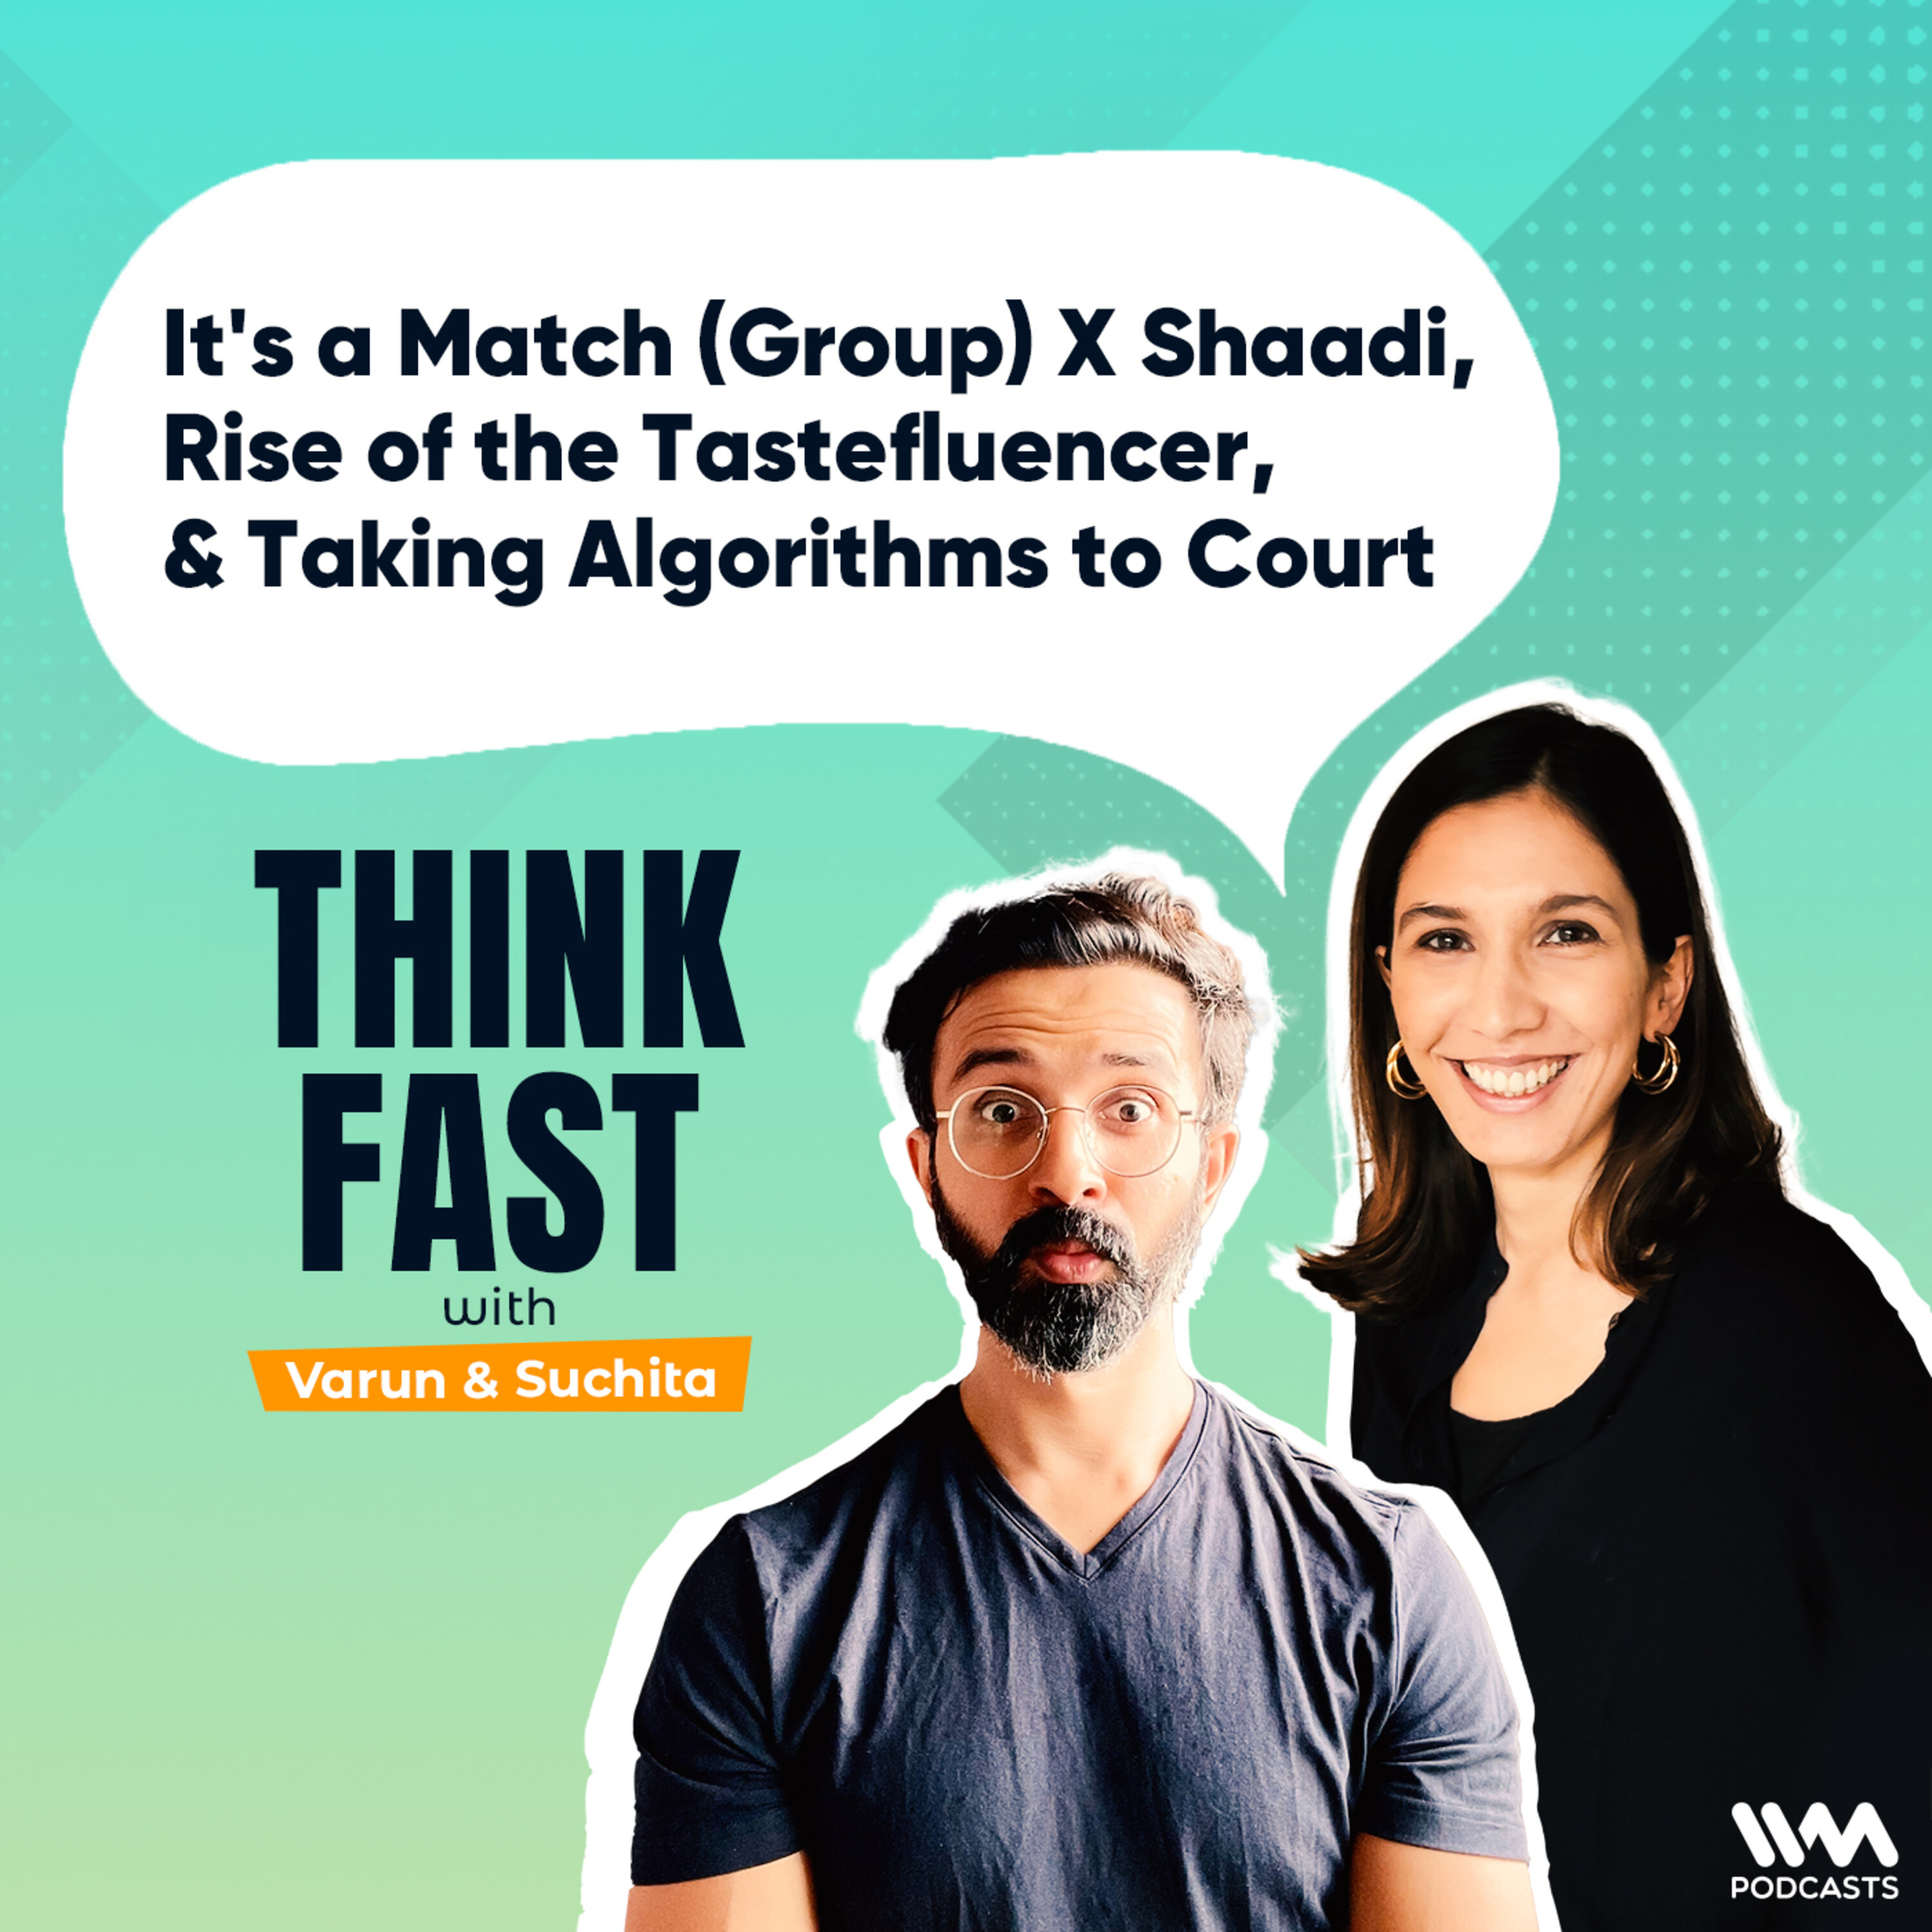 It's a Match (group) X Shaadi, Rise of the Tastefluencer, & Taking Algorithms to Court